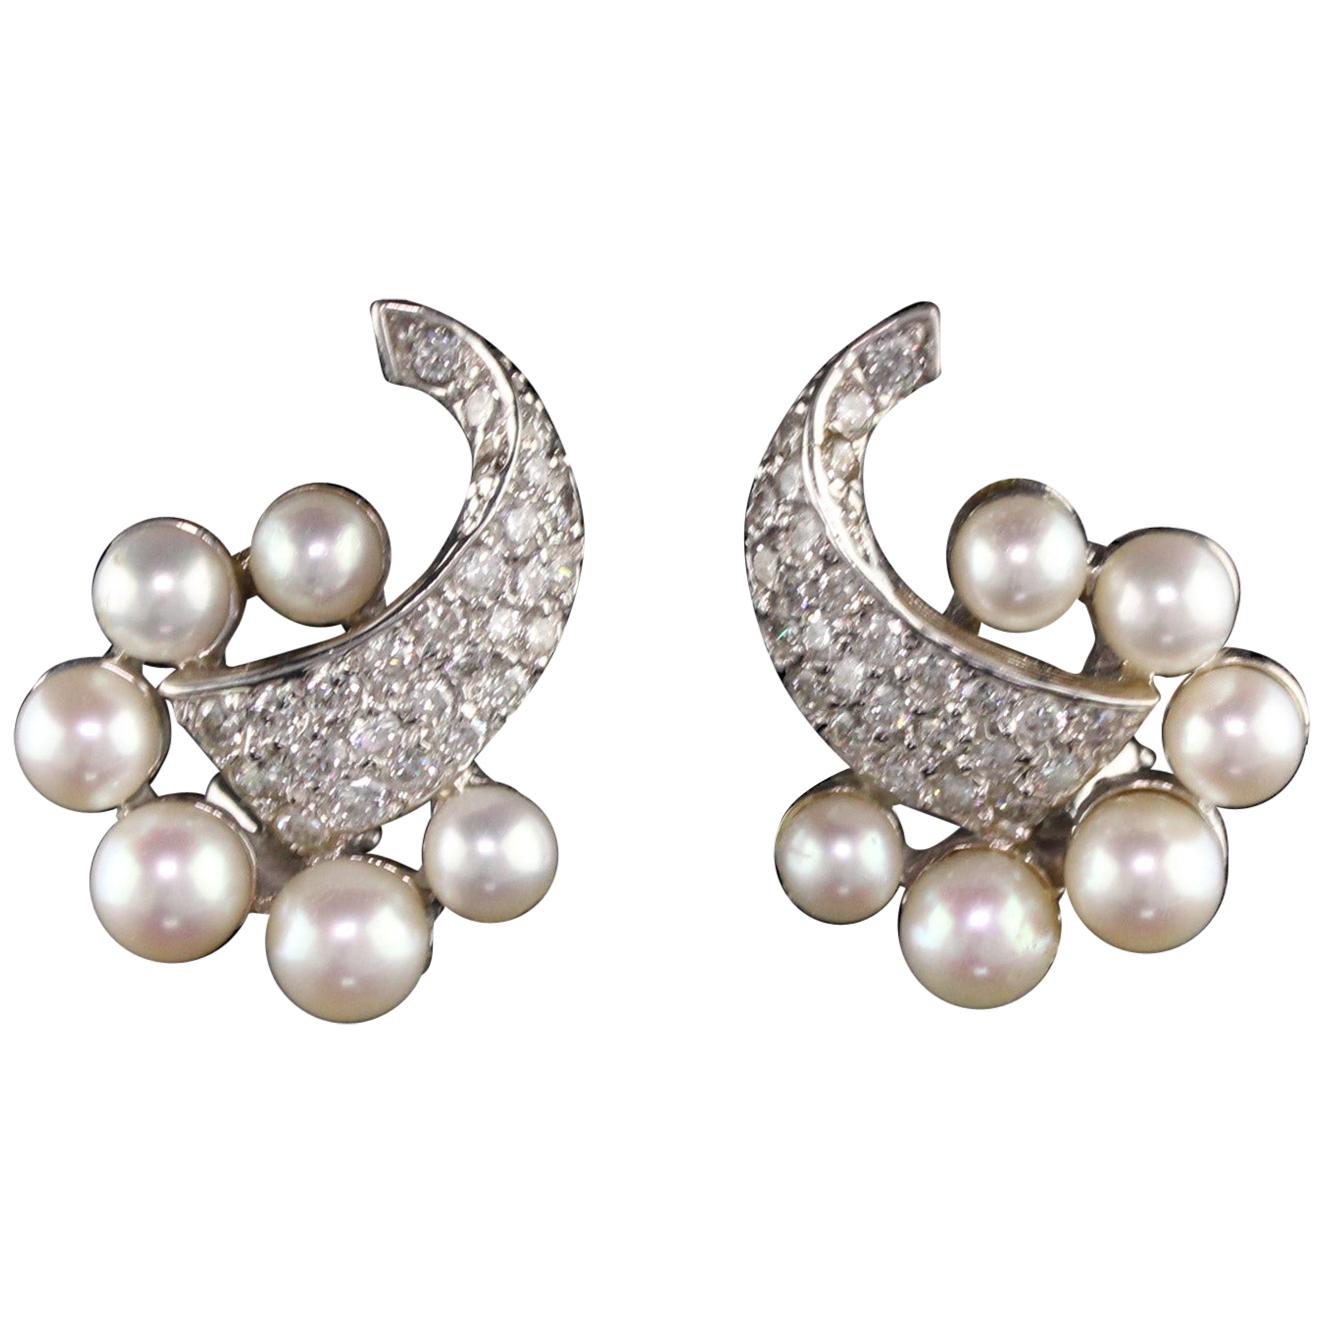 Vintage Estate 14 Karat White Gold Diamond and Pearl Earrings For Sale